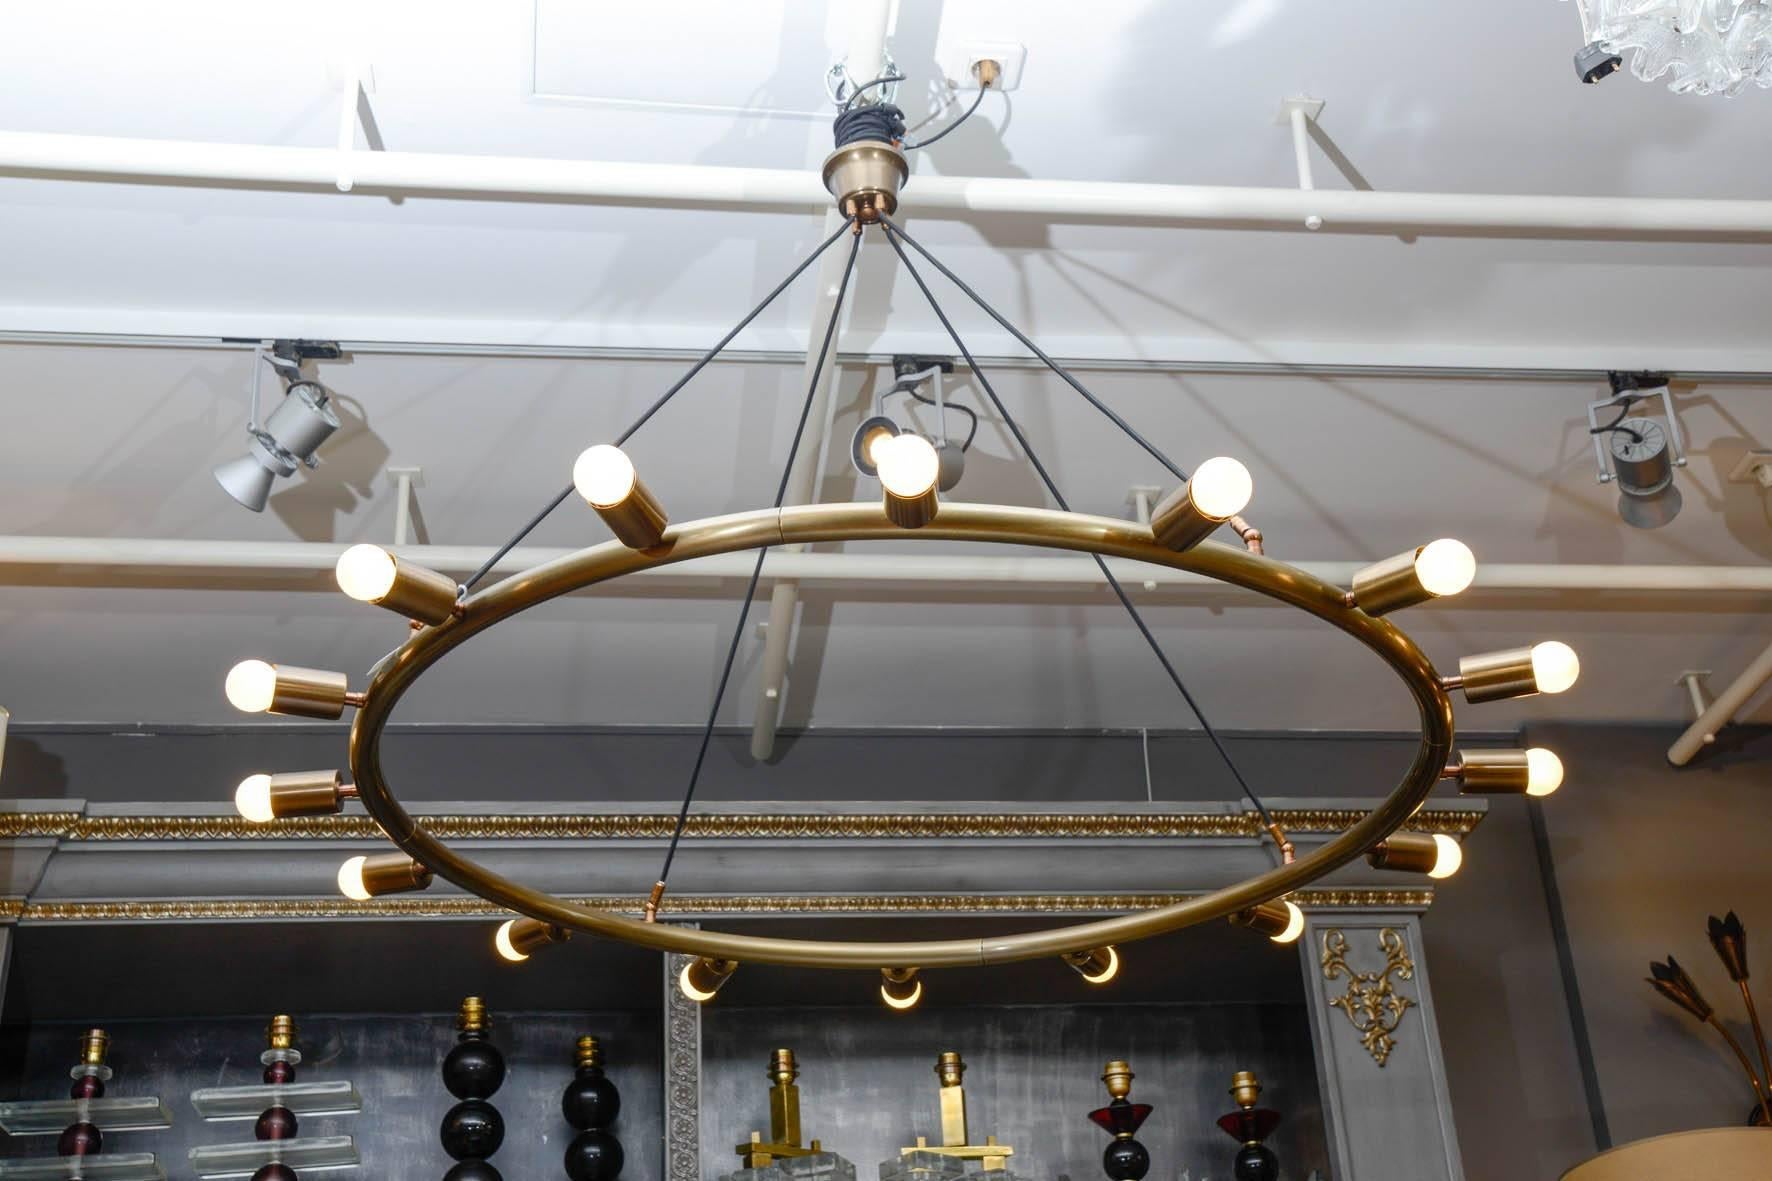 Glustin Luminaires design, brass hoop chandeliers suspended by fabric wires which height can be adjusted.